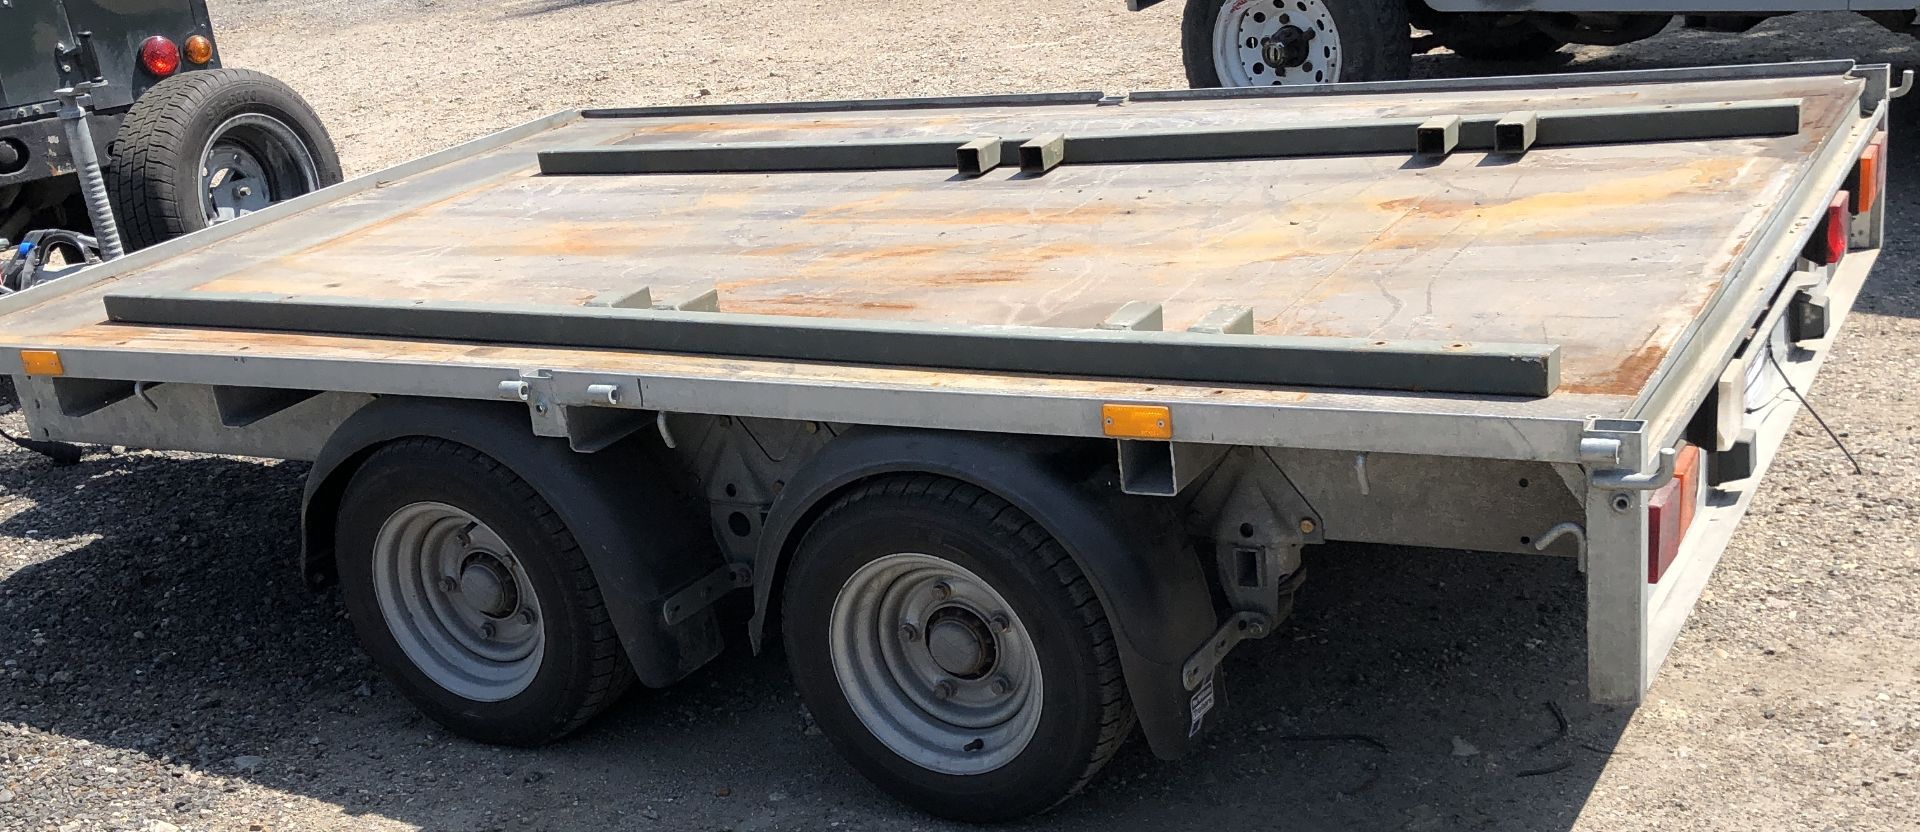 Ifor Williams Type DB S350 Twin Axle Flat Trailer, Serial Number 05115306 (2015), GVW 3500Kg; 10’ - Image 4 of 9